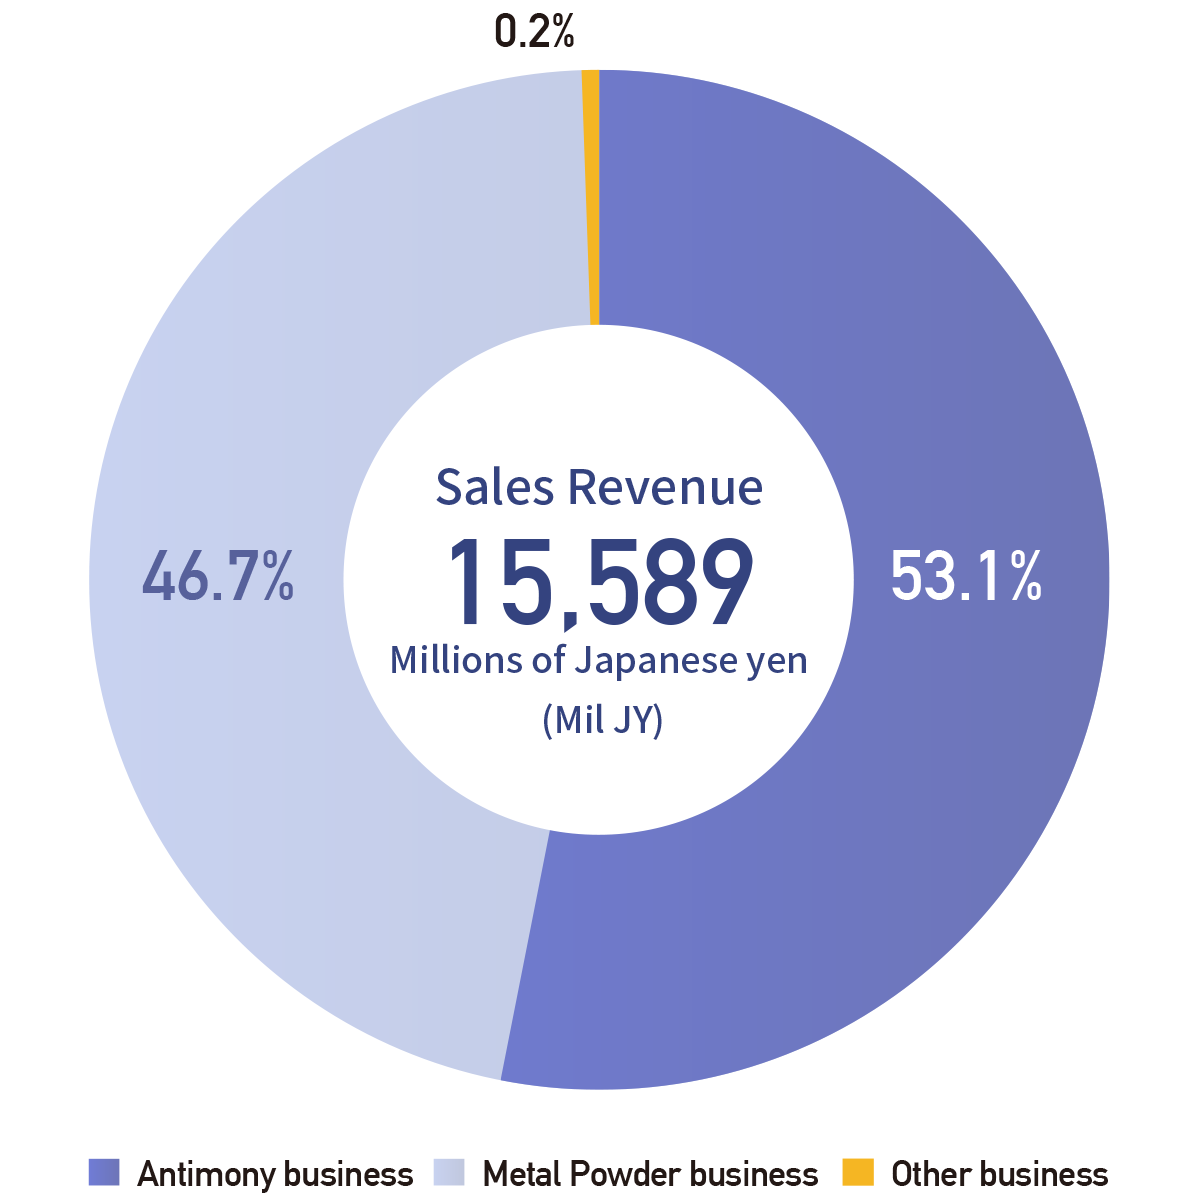 Sales Revenue by Business Segment (Full year)